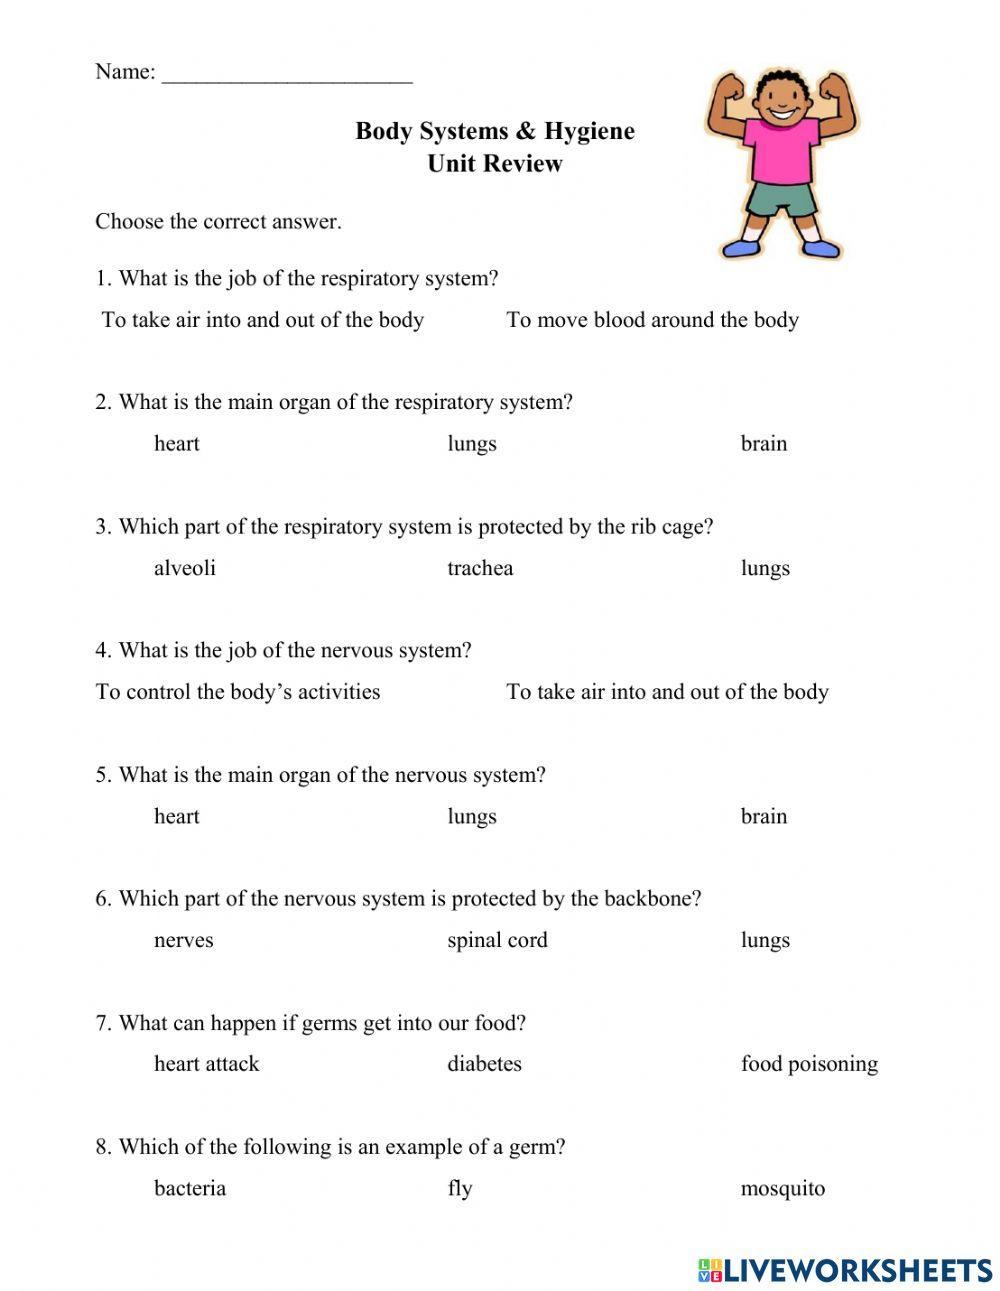 Body Systems and Hygiene Unit Review